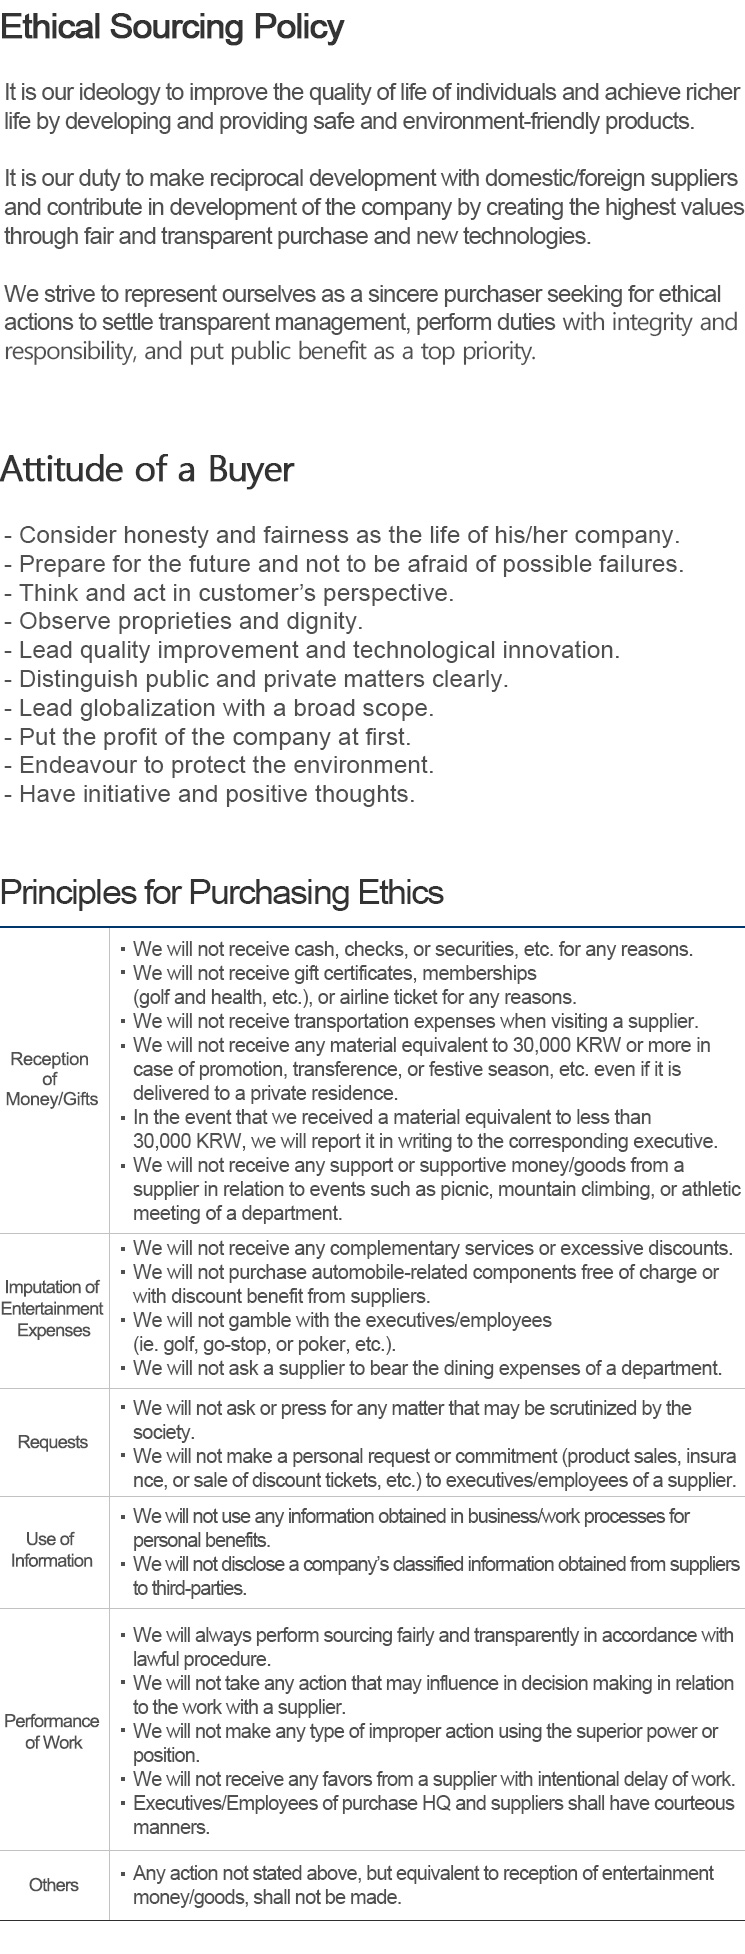 Ethical Sourcing Policy